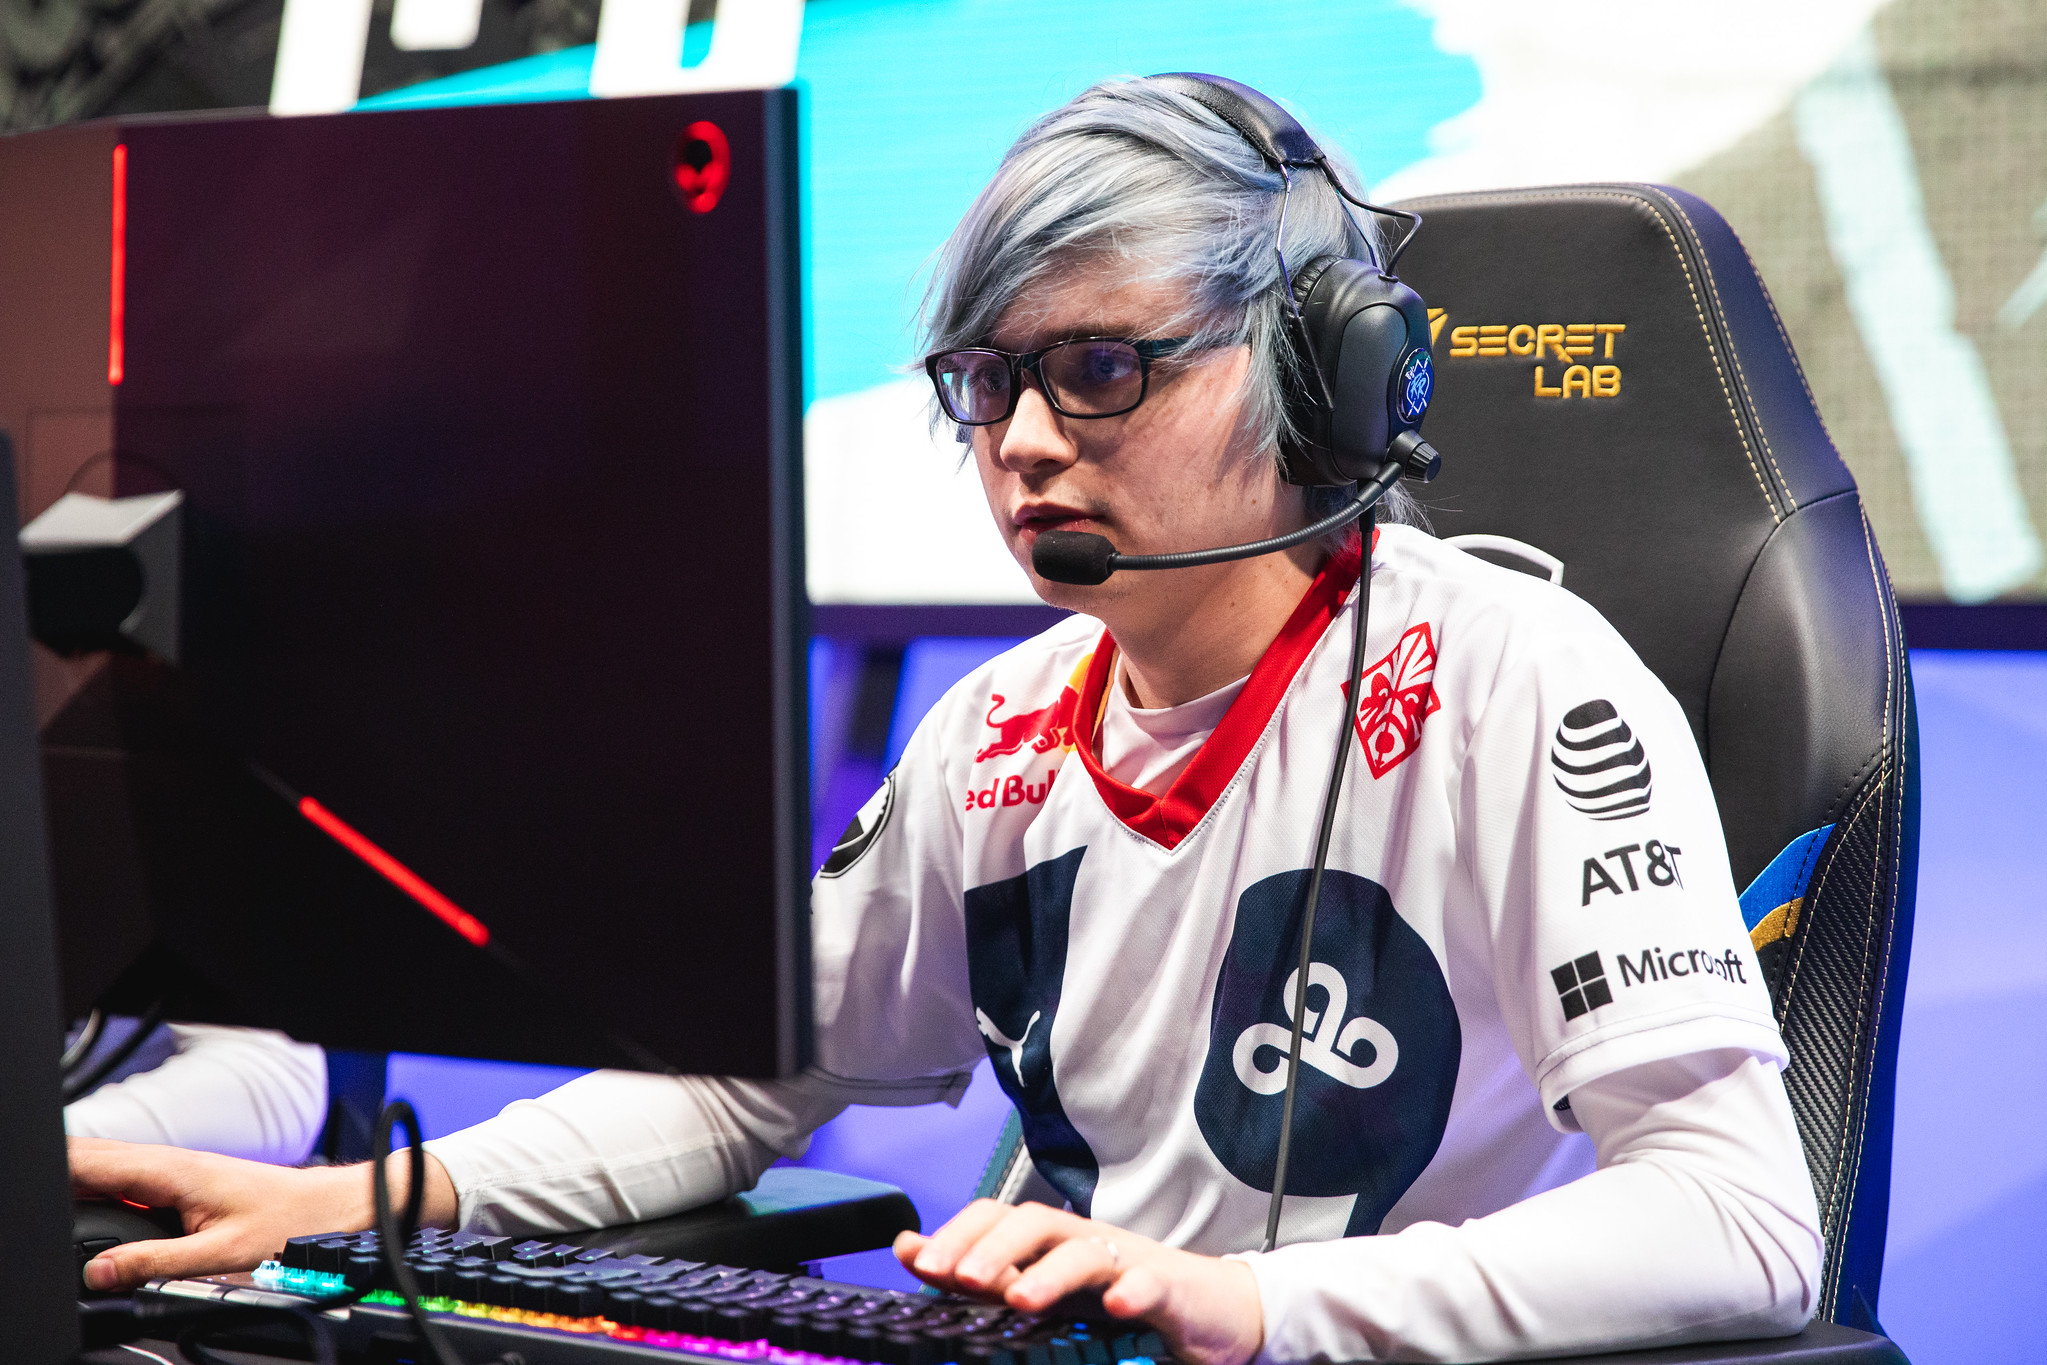 Sneaky out of Cloud9's starting lineup due to sickness, Blaber to fill in as ADC⁠ | Dot Esports